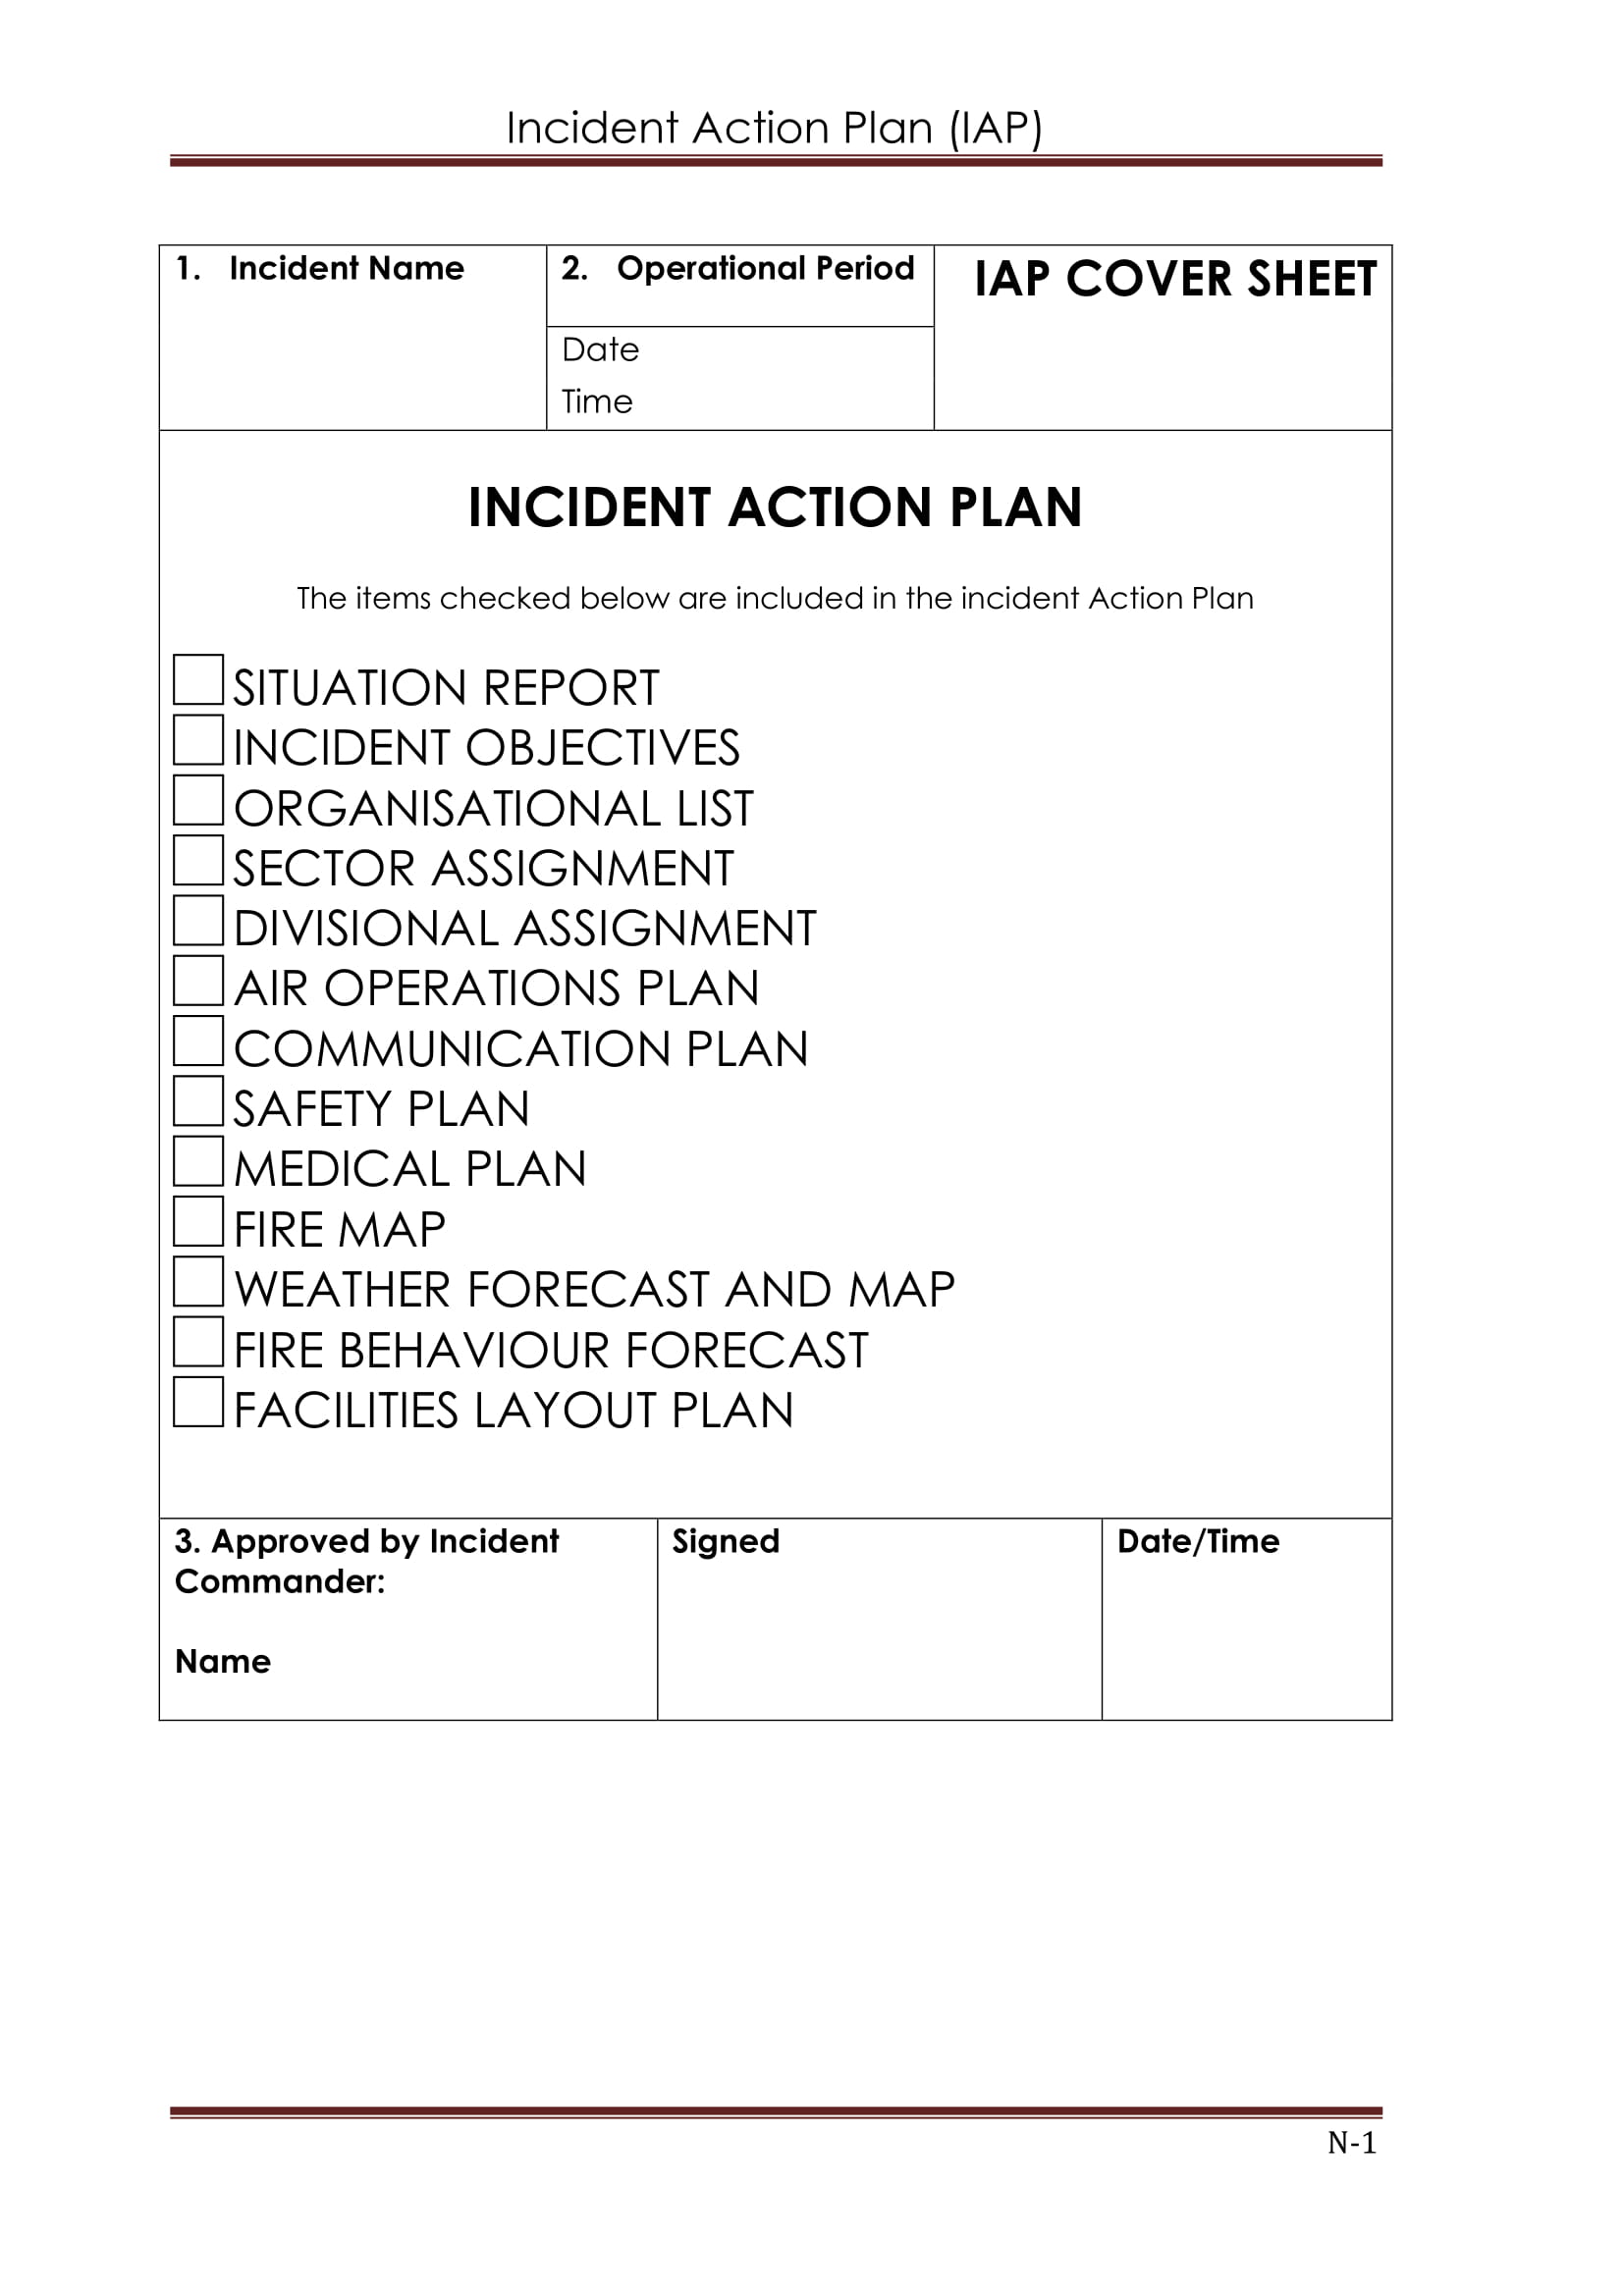 basic incident action plan example1